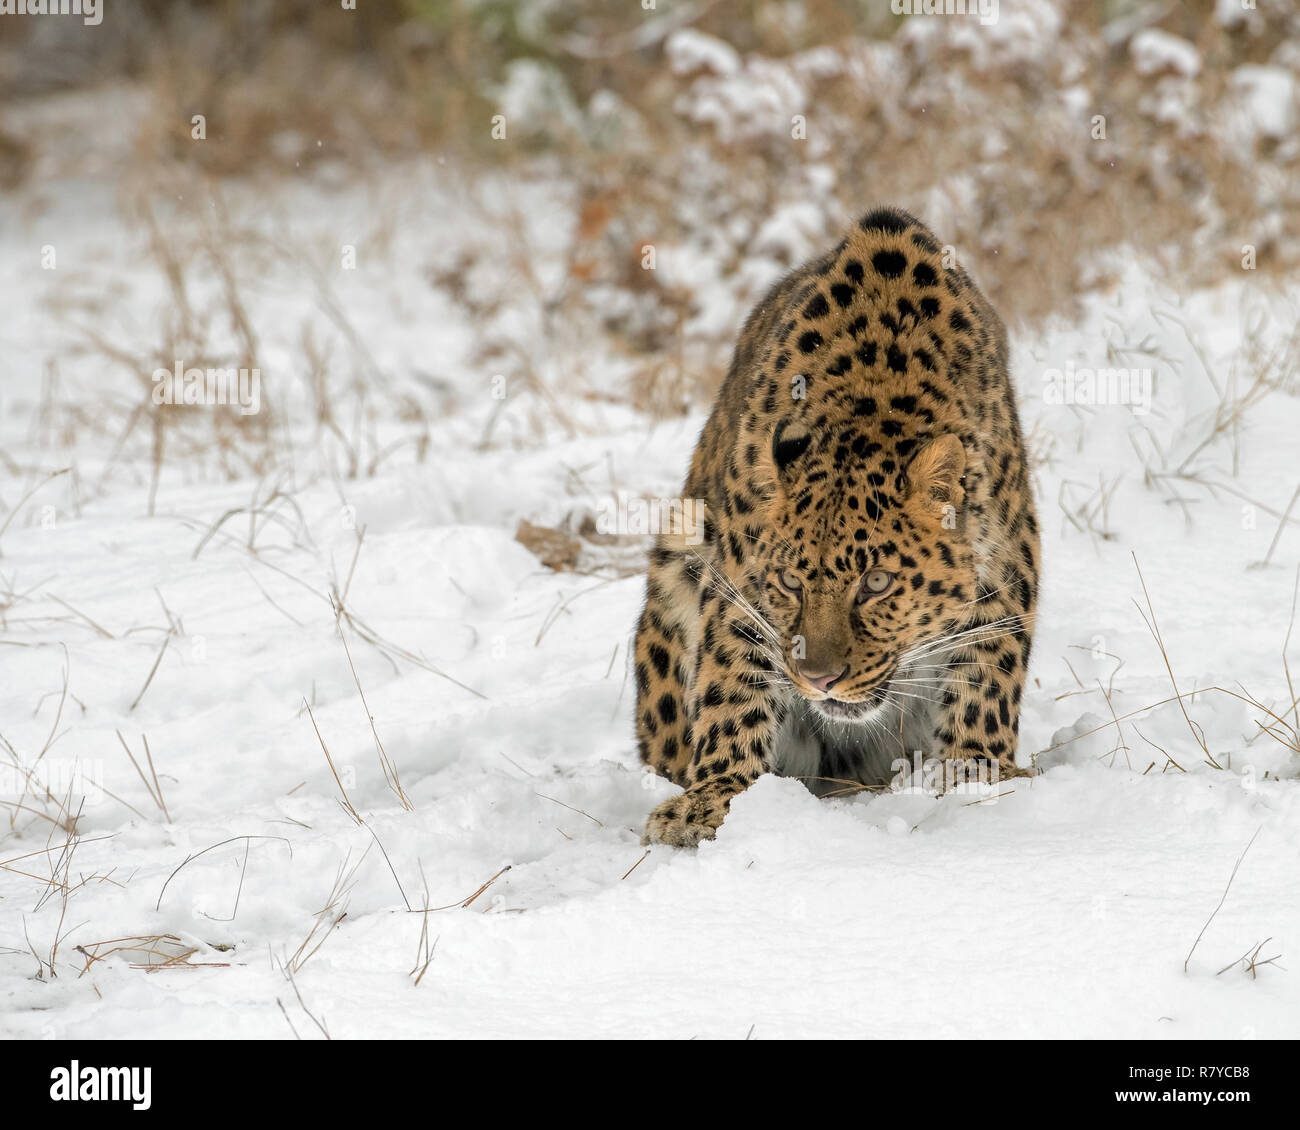 Amur Leopard Hunched over in the Snow in Winter during Snowfall Stock Photo